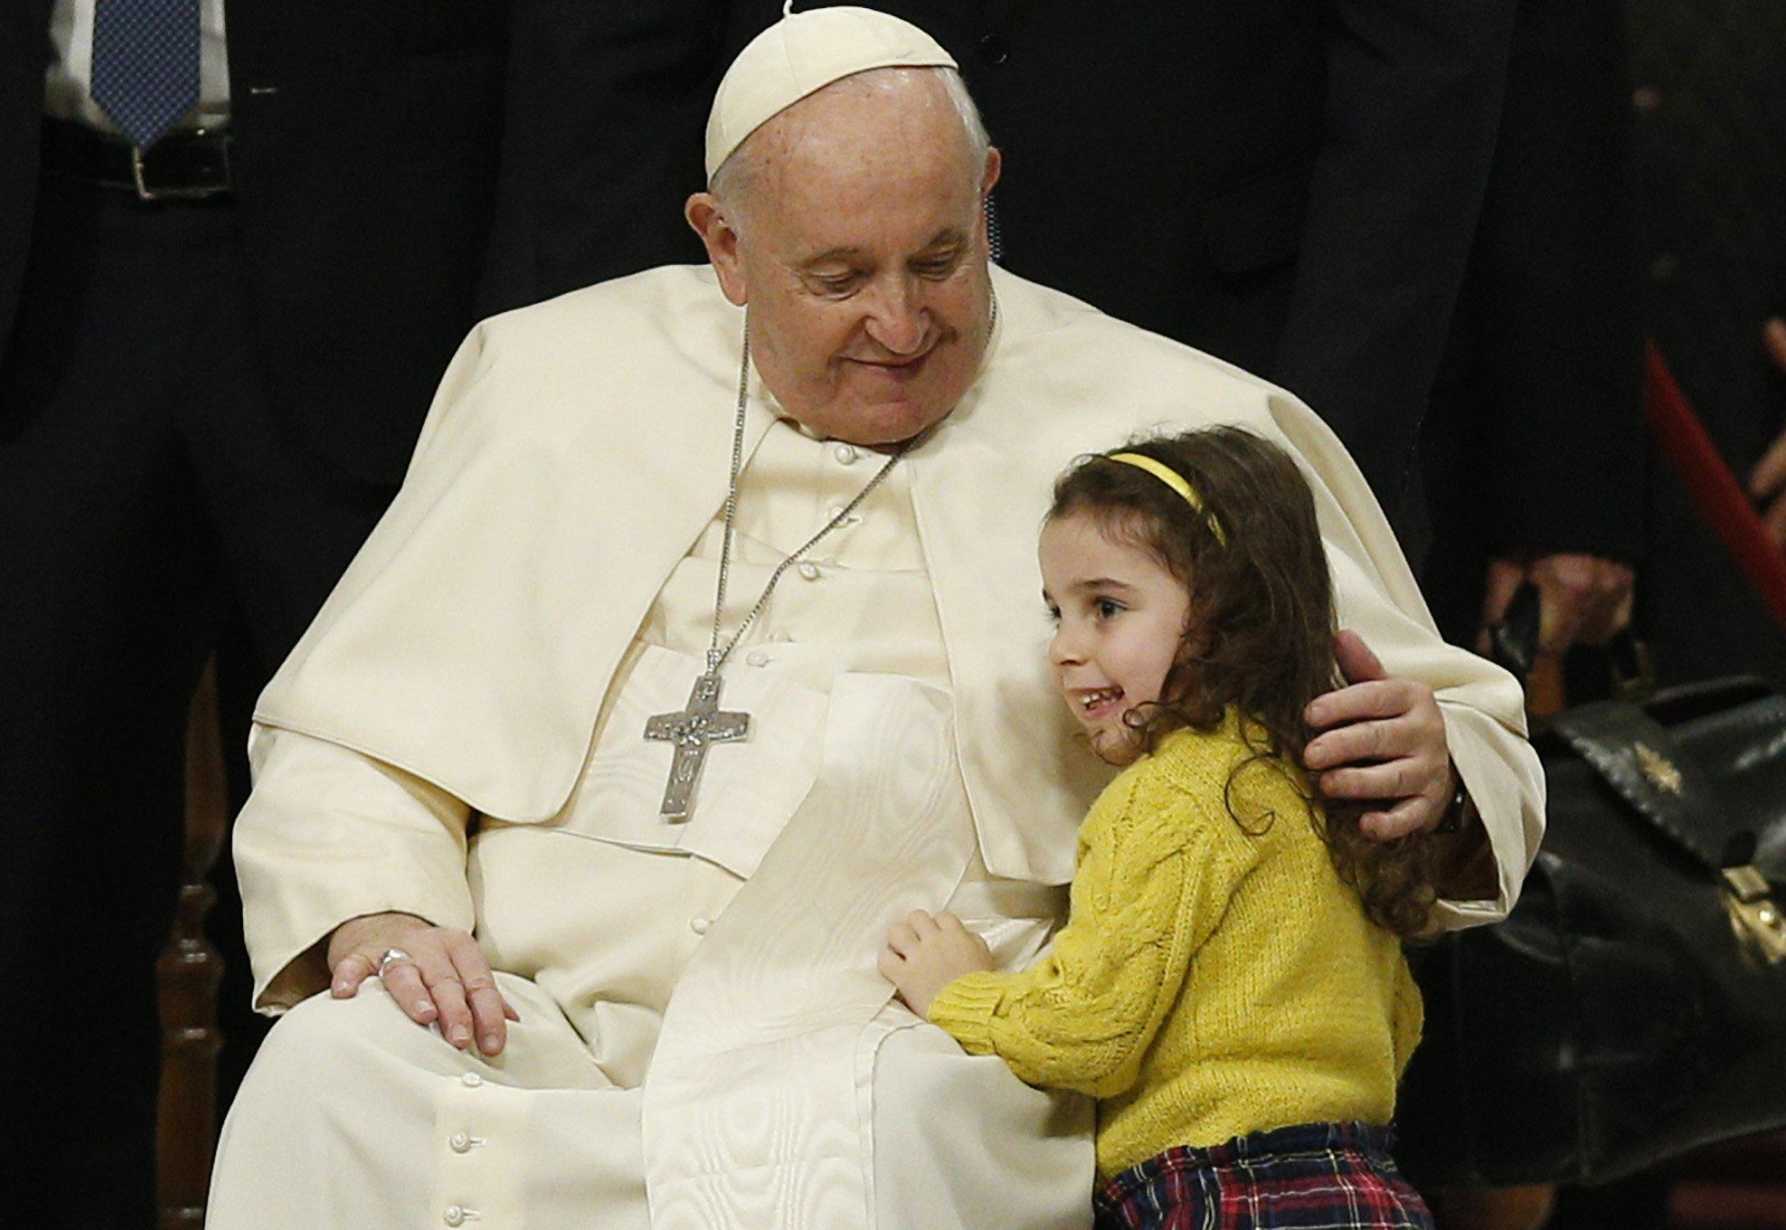 Pope pays tribute to the late Pope Benedict, highlighting his gentleness